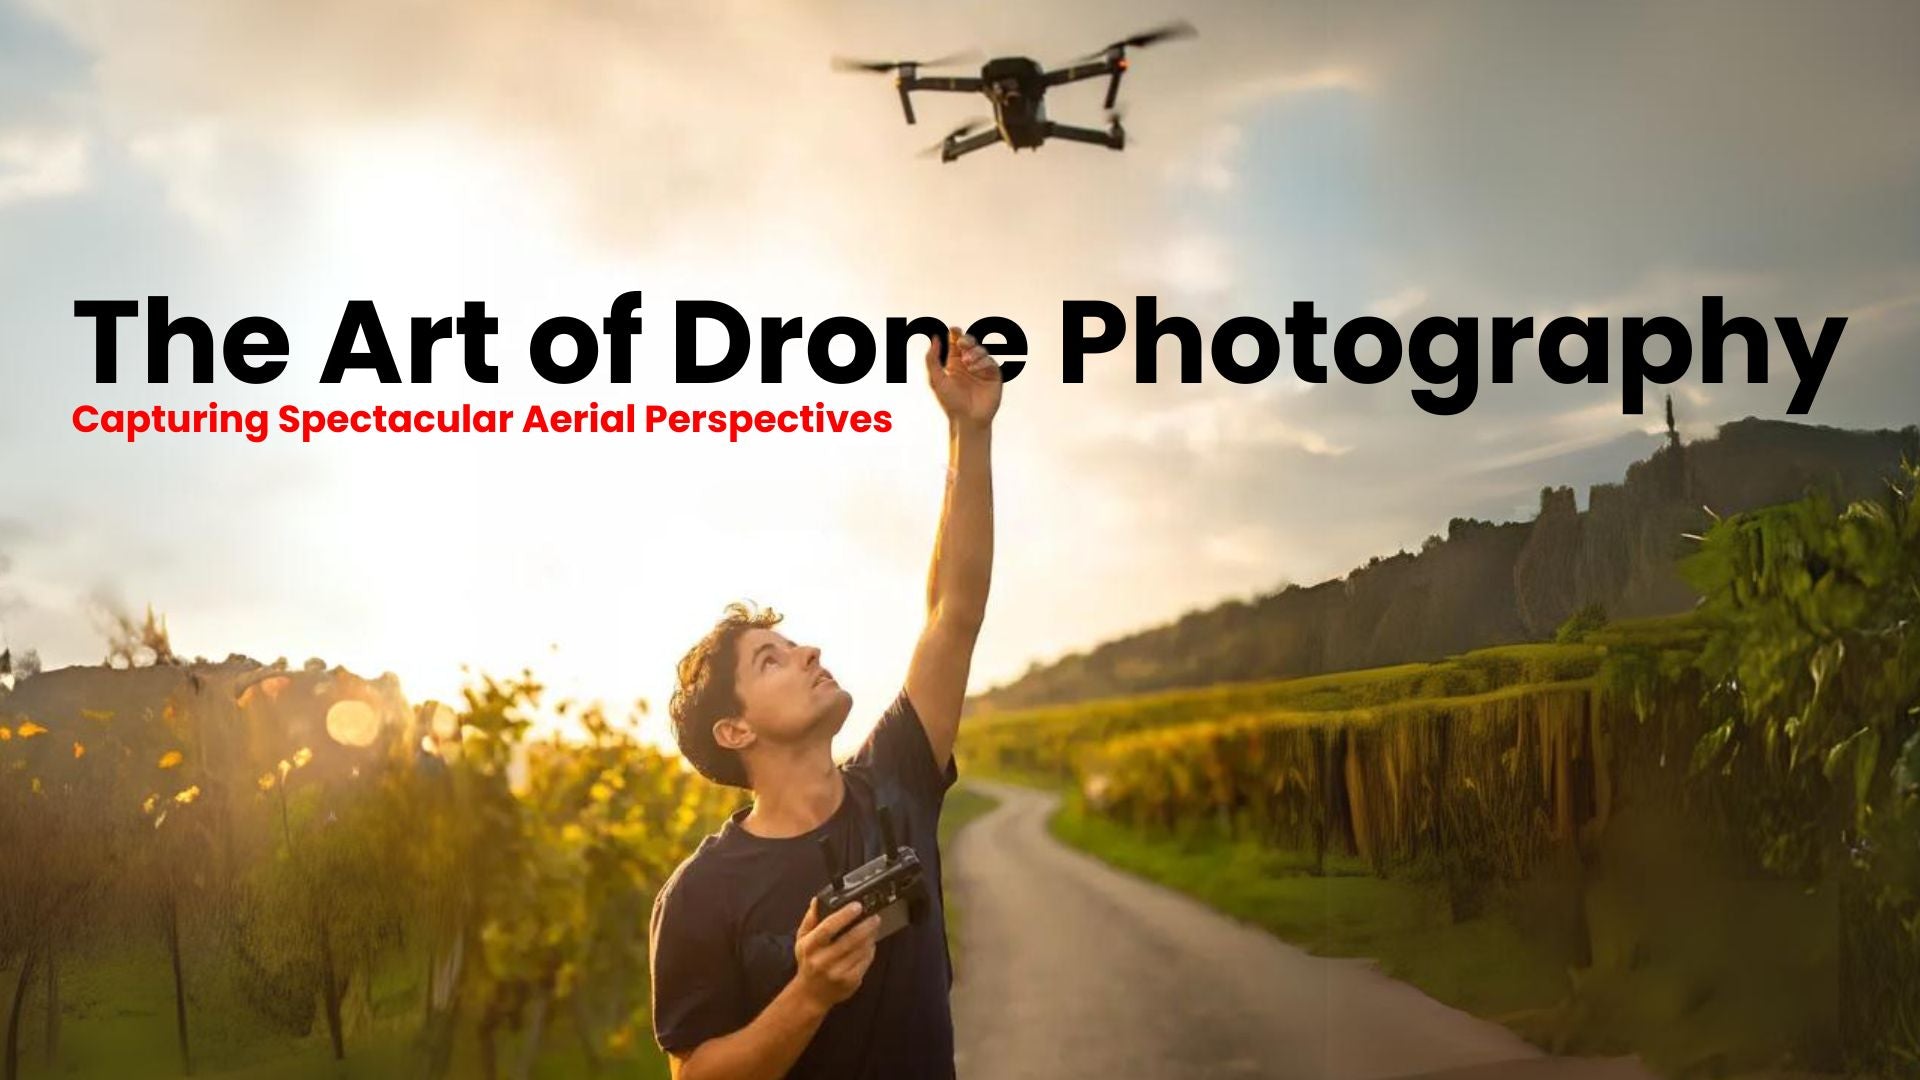 The Art of Drone Photography: Capturing Spectacular Aerial Perspectives